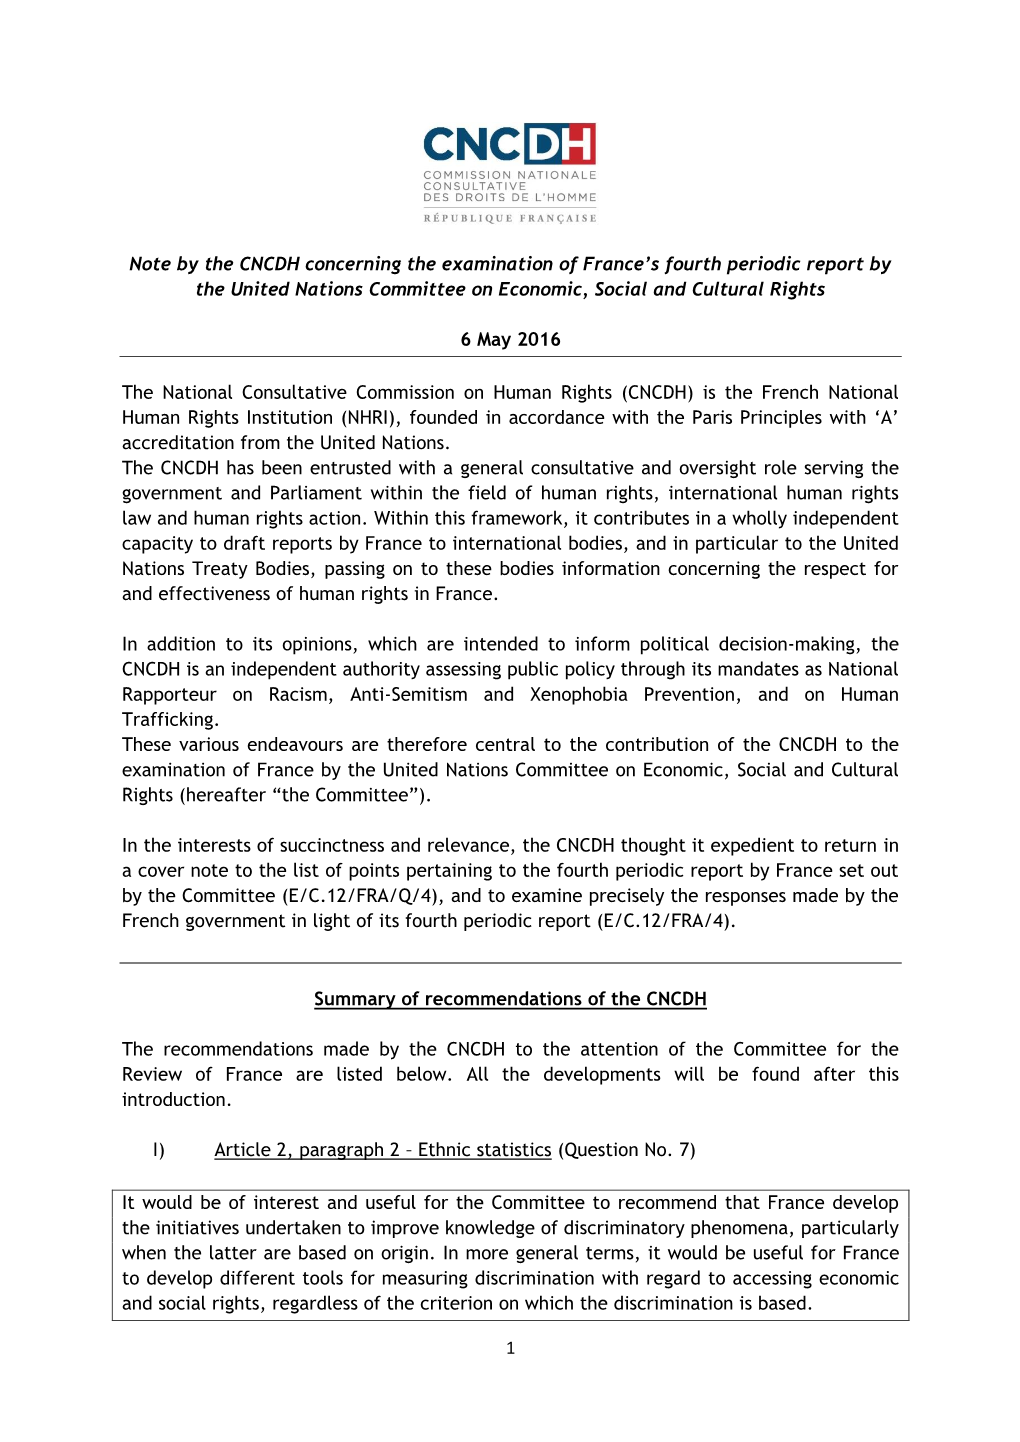 1 Note by the CNCDH Concerning the Examination of France's Fourth